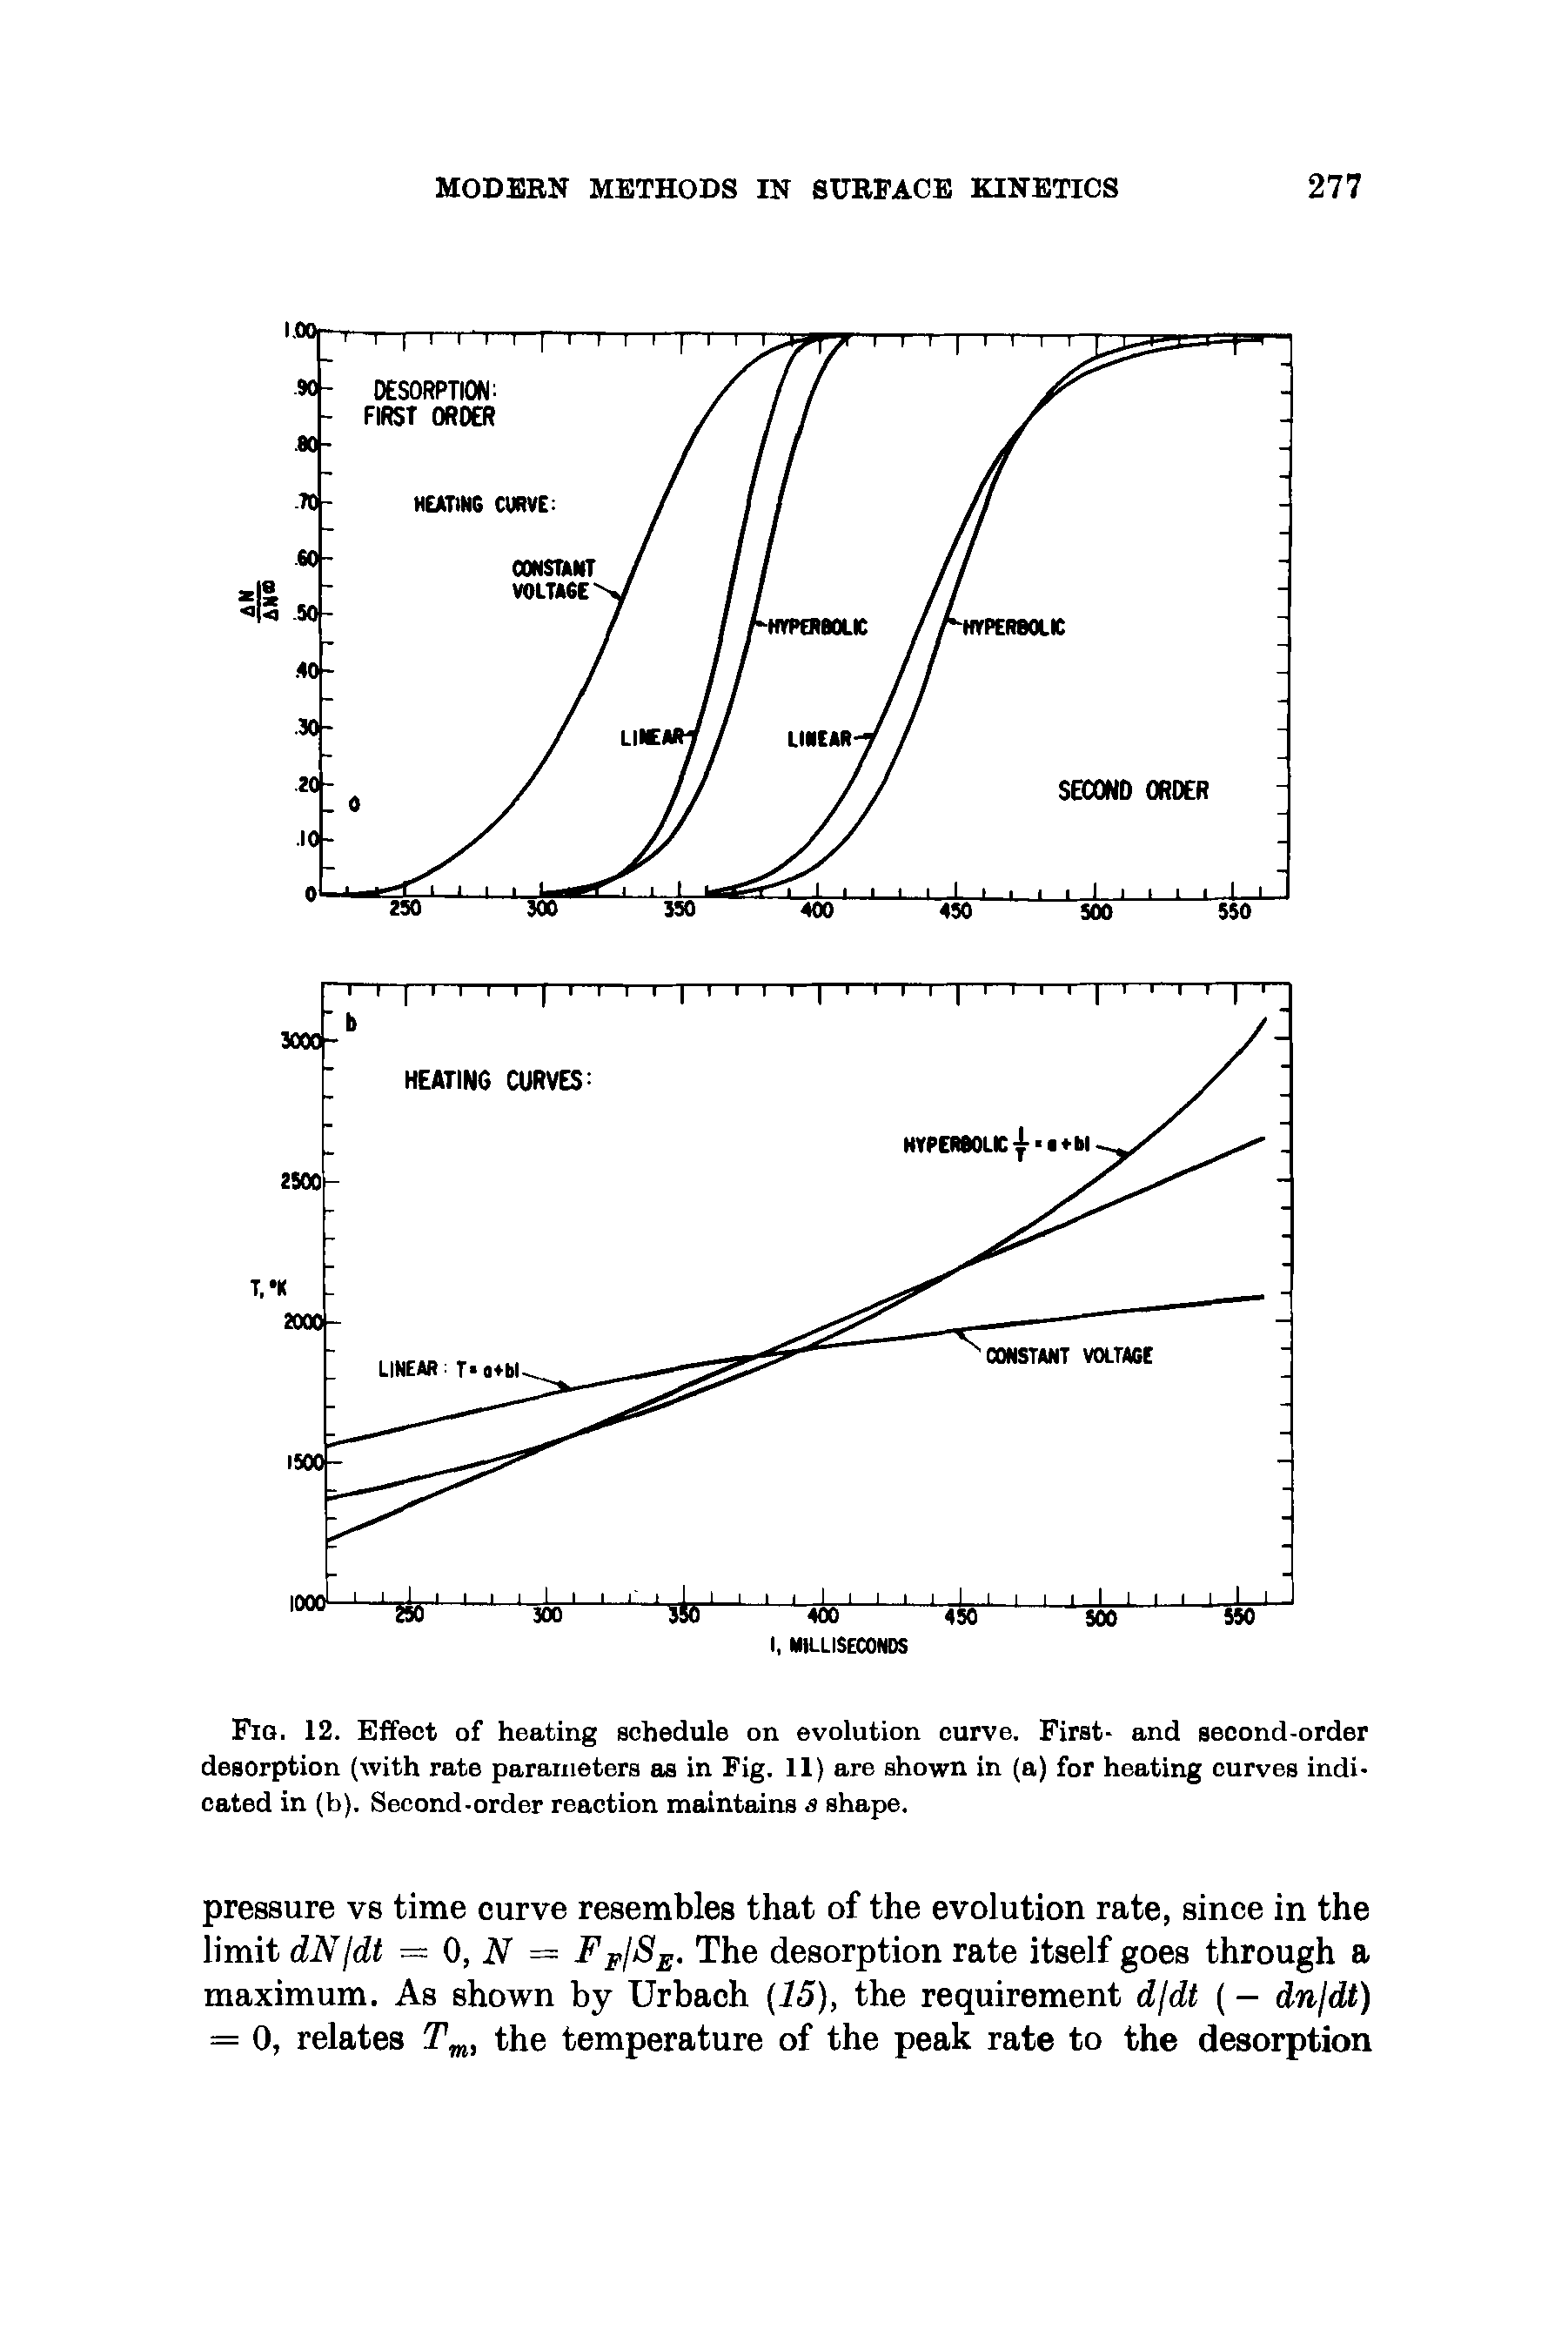 Fig. 12. Effect of heating schedule on evolution curve. First- and second-order desorption (with rate parameters as in Fig. 11) are shown in (a) for heating curves indicated in (b). Second-order reaction maintains s shape.